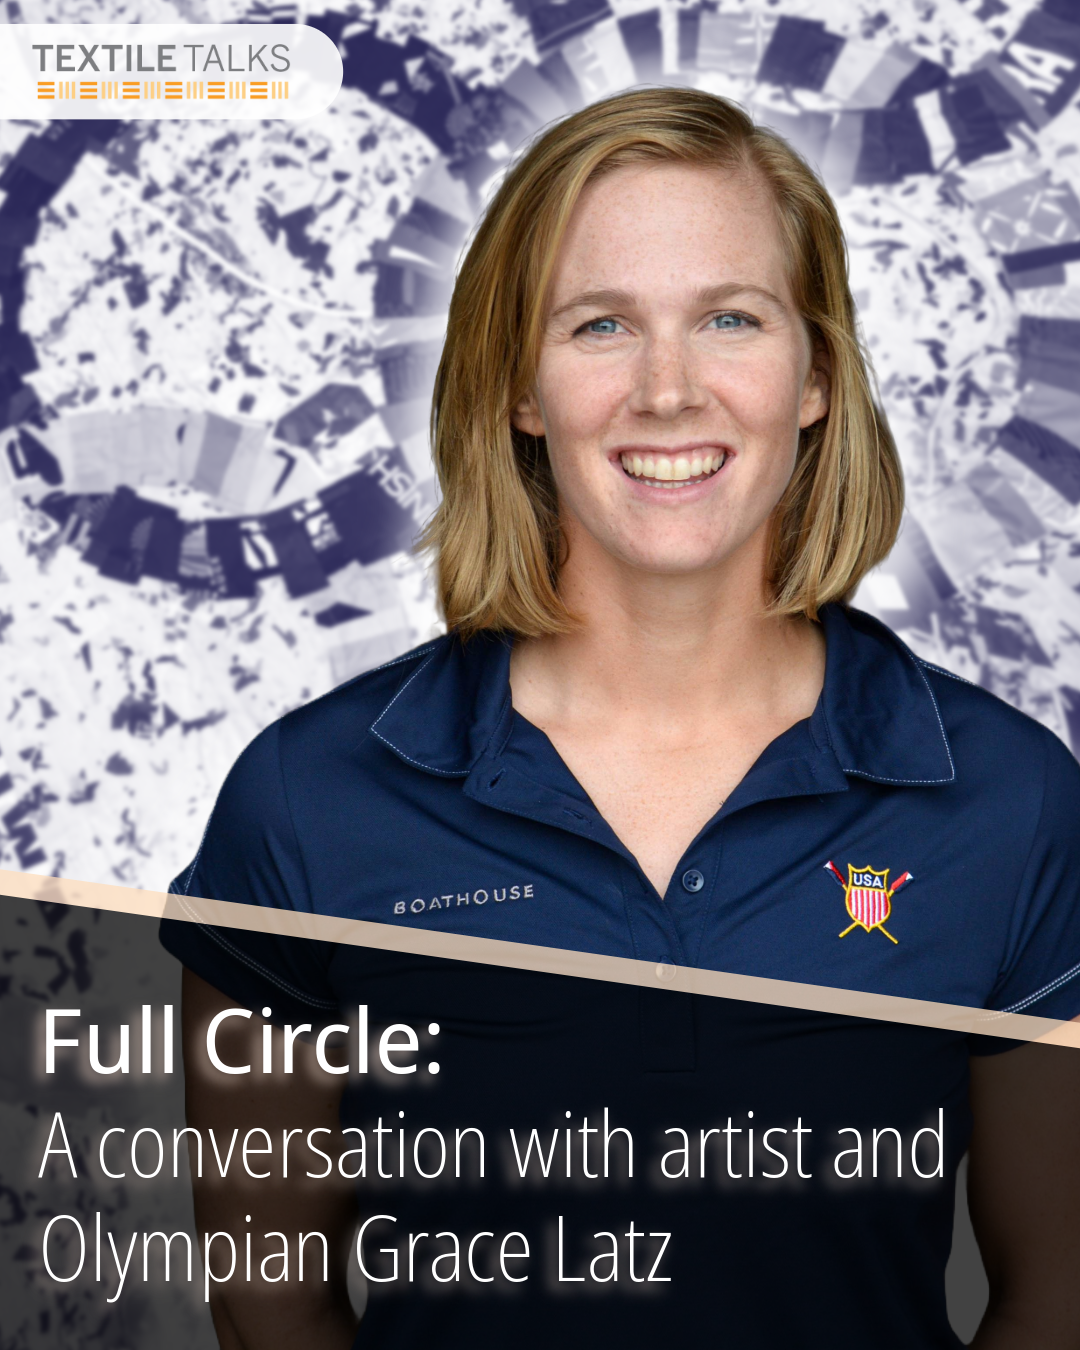 Topic Full Circle: A Conversation with Artist and Olympian Grace Latz